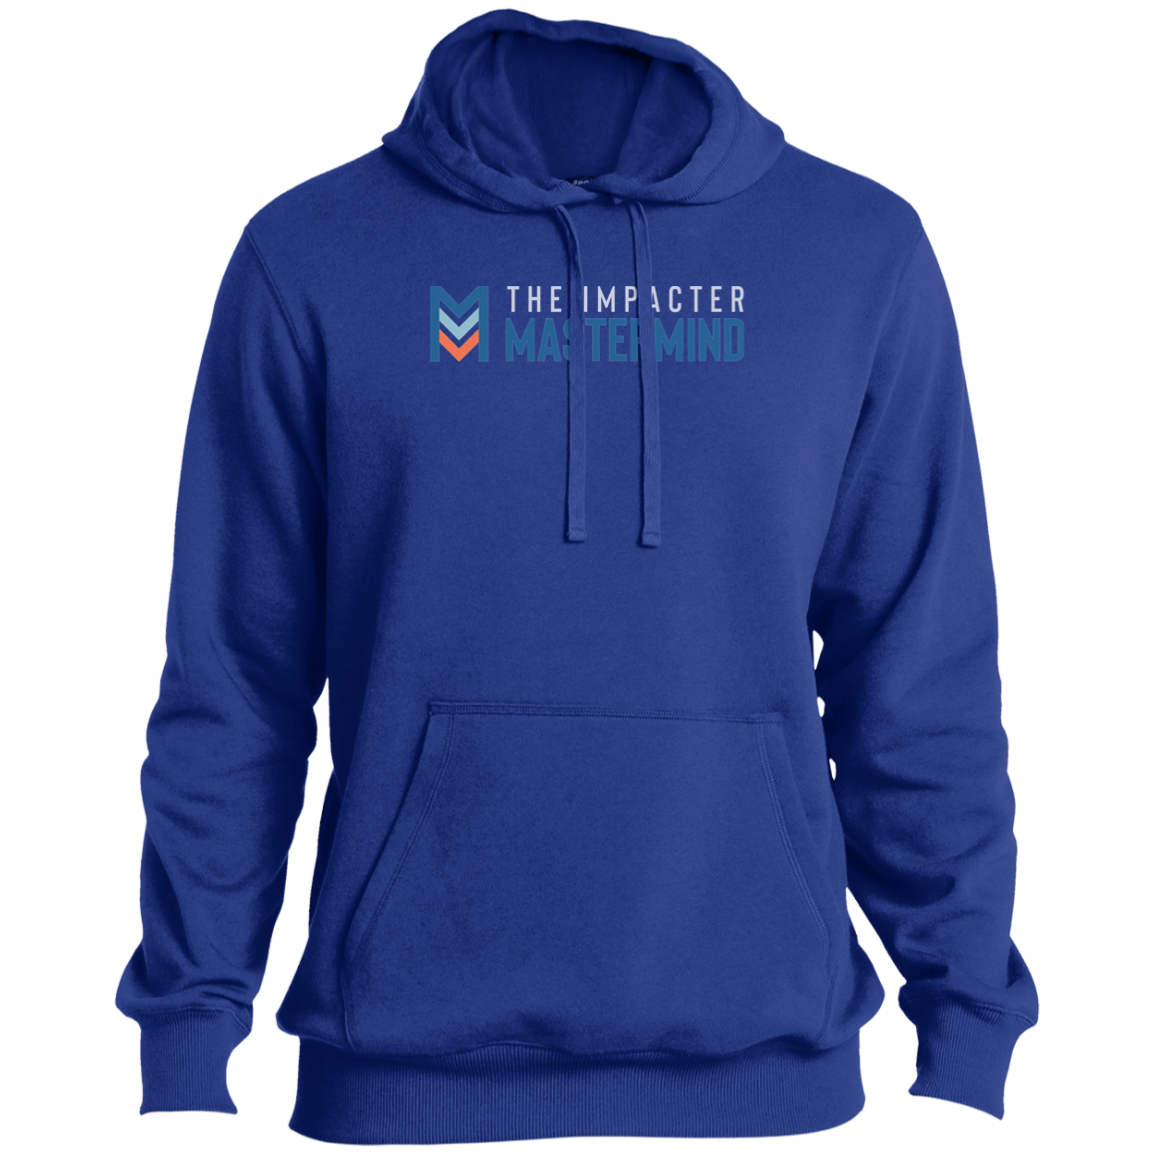 The Impacter Mastermind - Pullover Hoodie